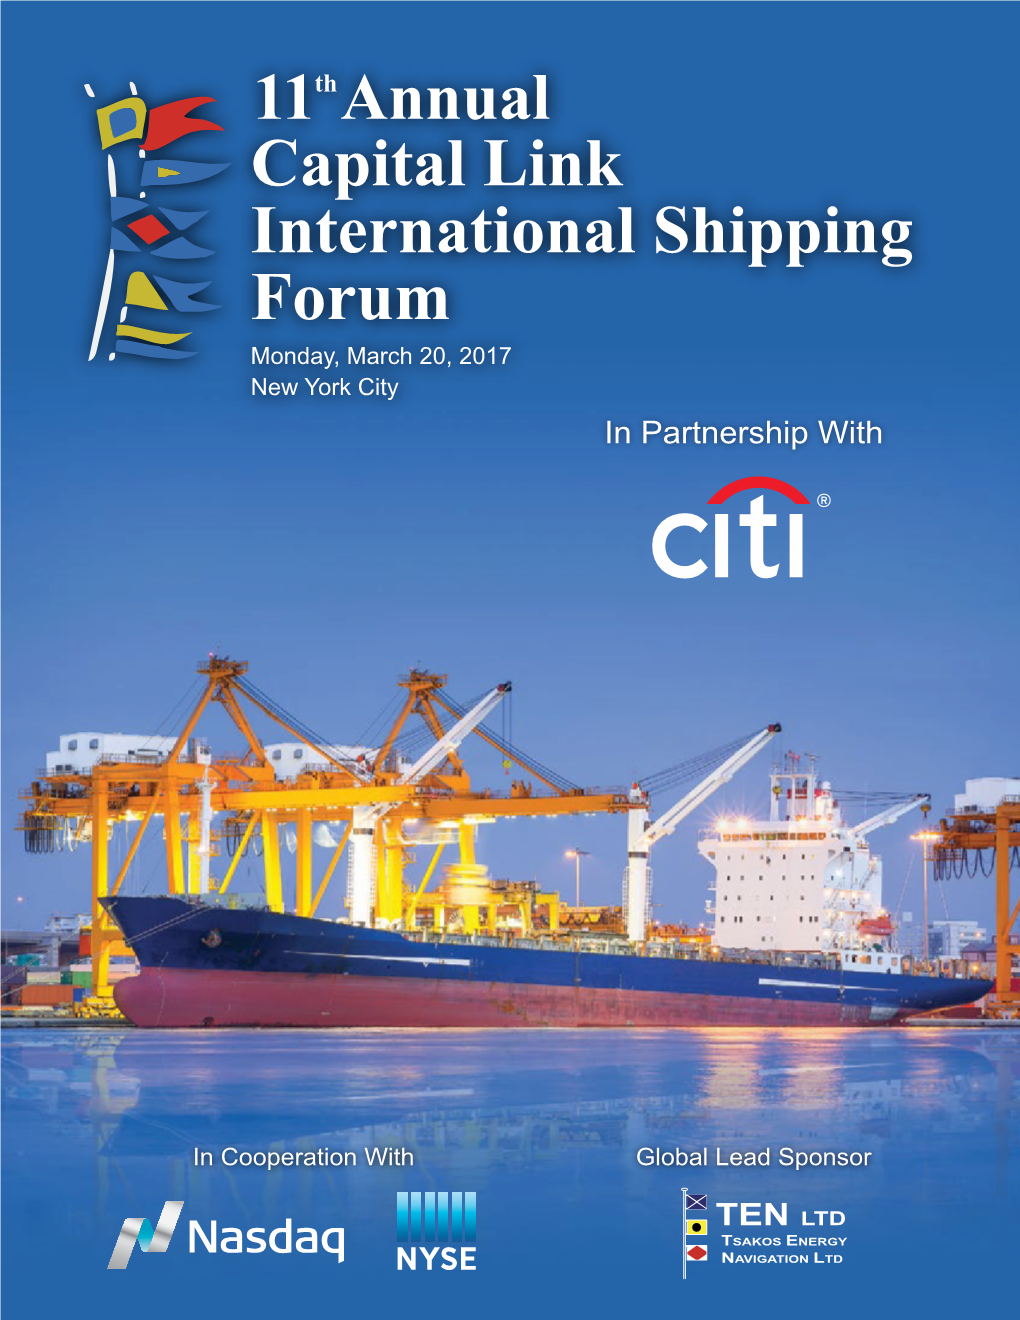 Capital Link International Shipping Forum Monday, March 20, 2017 New York City in Partnership With